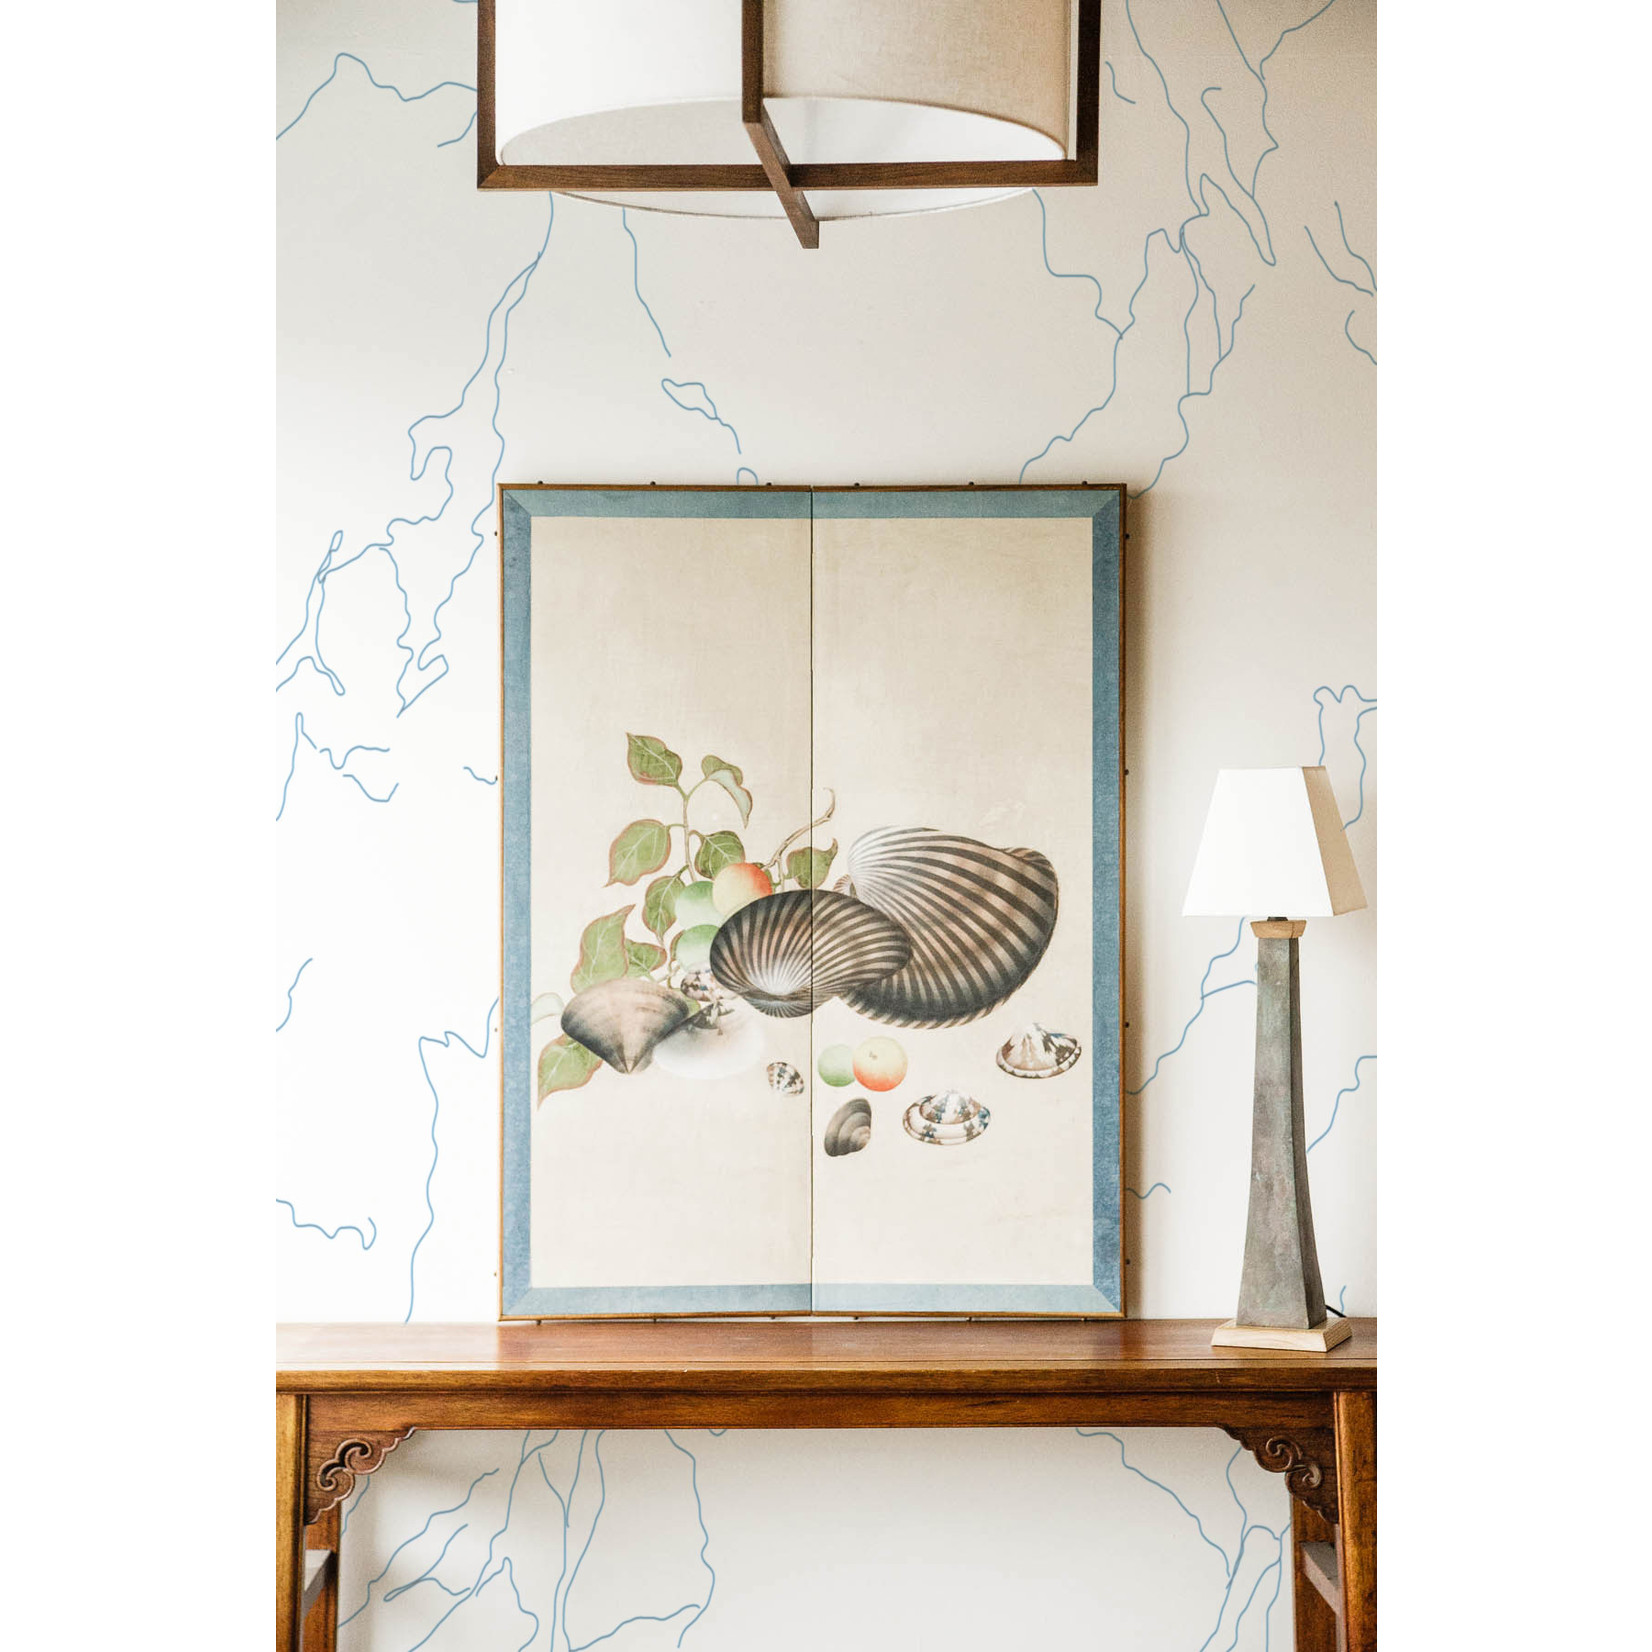 Lawrence & Scott Sung Tze-Chin Chinoiserie "Clams & Fruit" Silk Hanging Two-Panel Screen 17'' x 48''